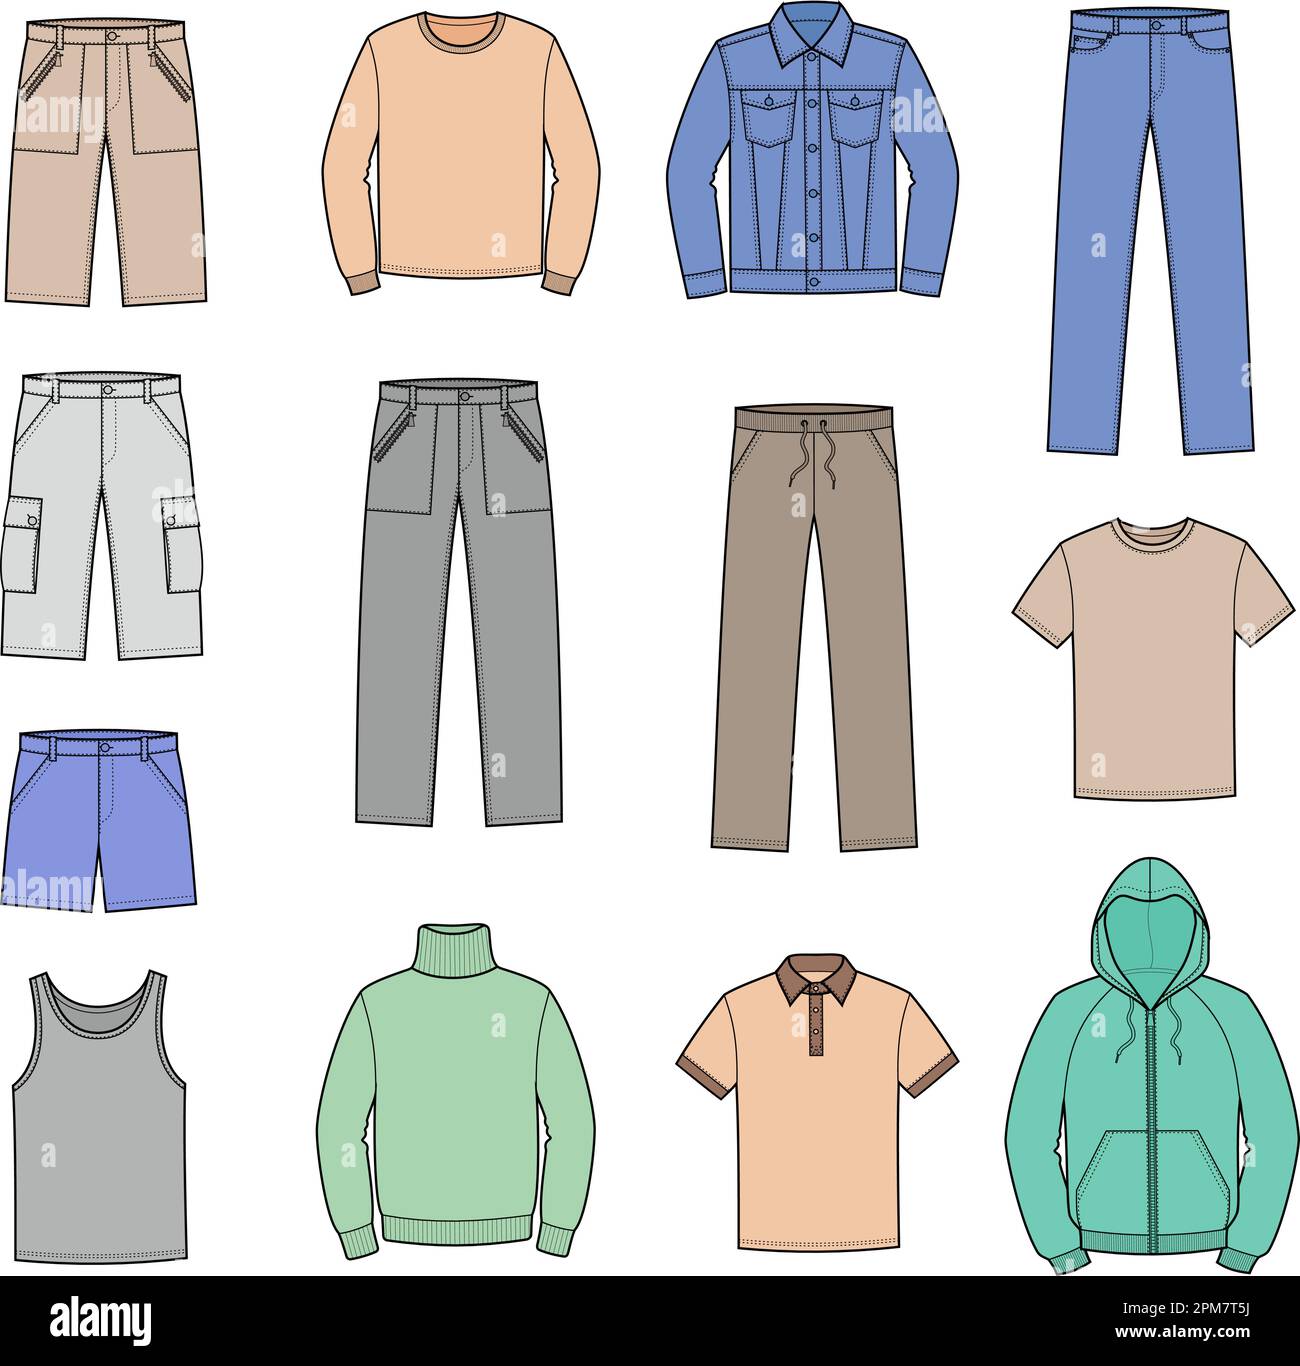 Too short trousers Stock Vector Images - Page 3 - Alamy